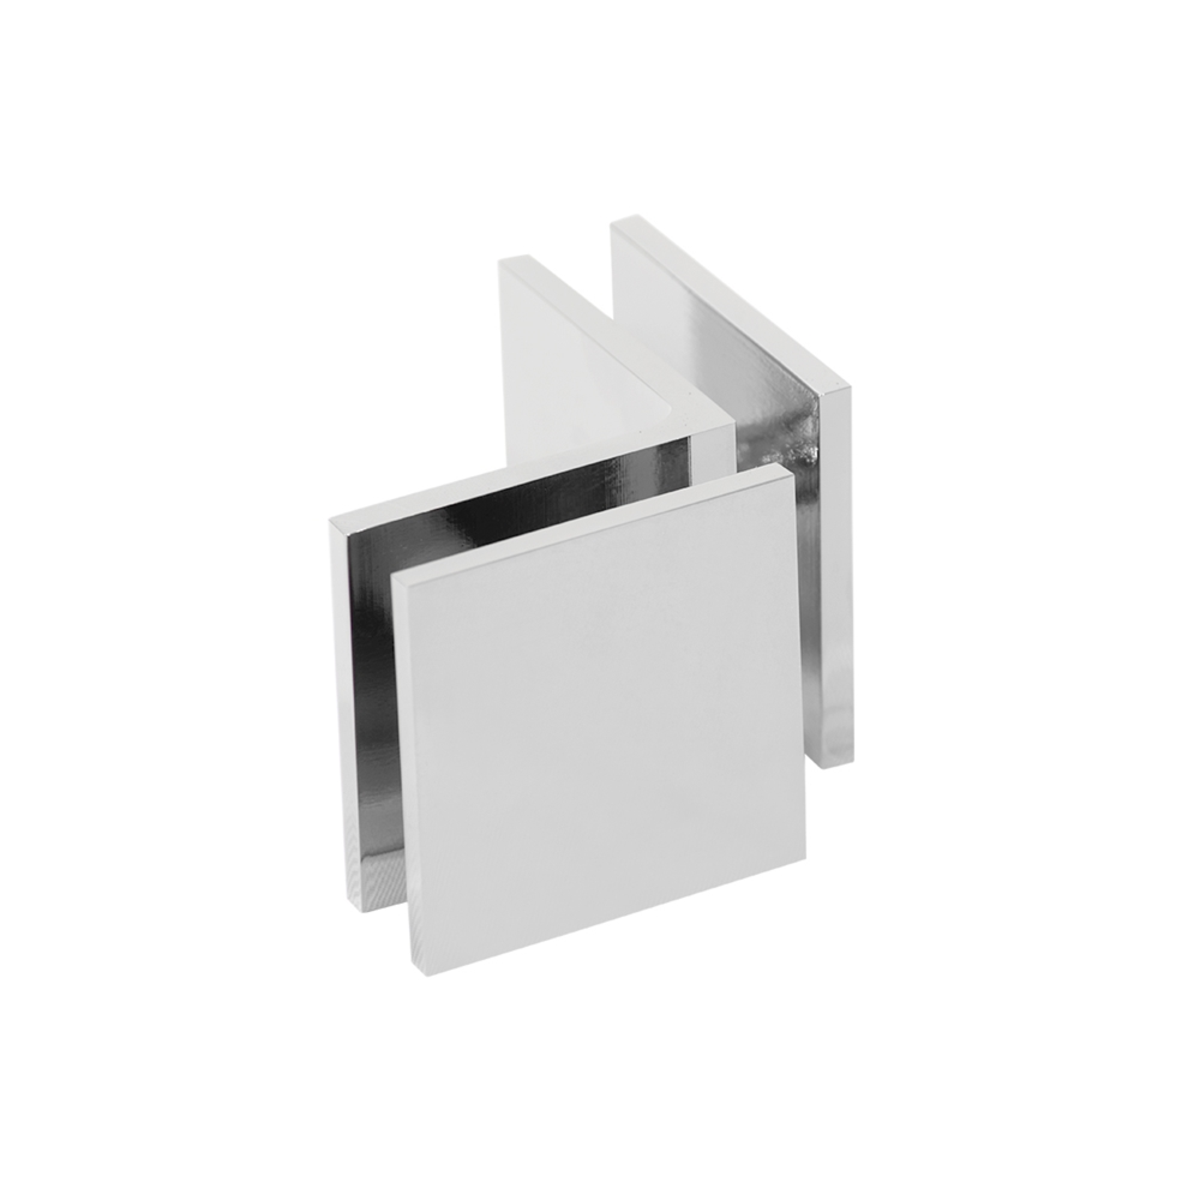 1 3/4" x 1 3/4" 90° Open Face Glass to Glass Square Edge Glass Clamp